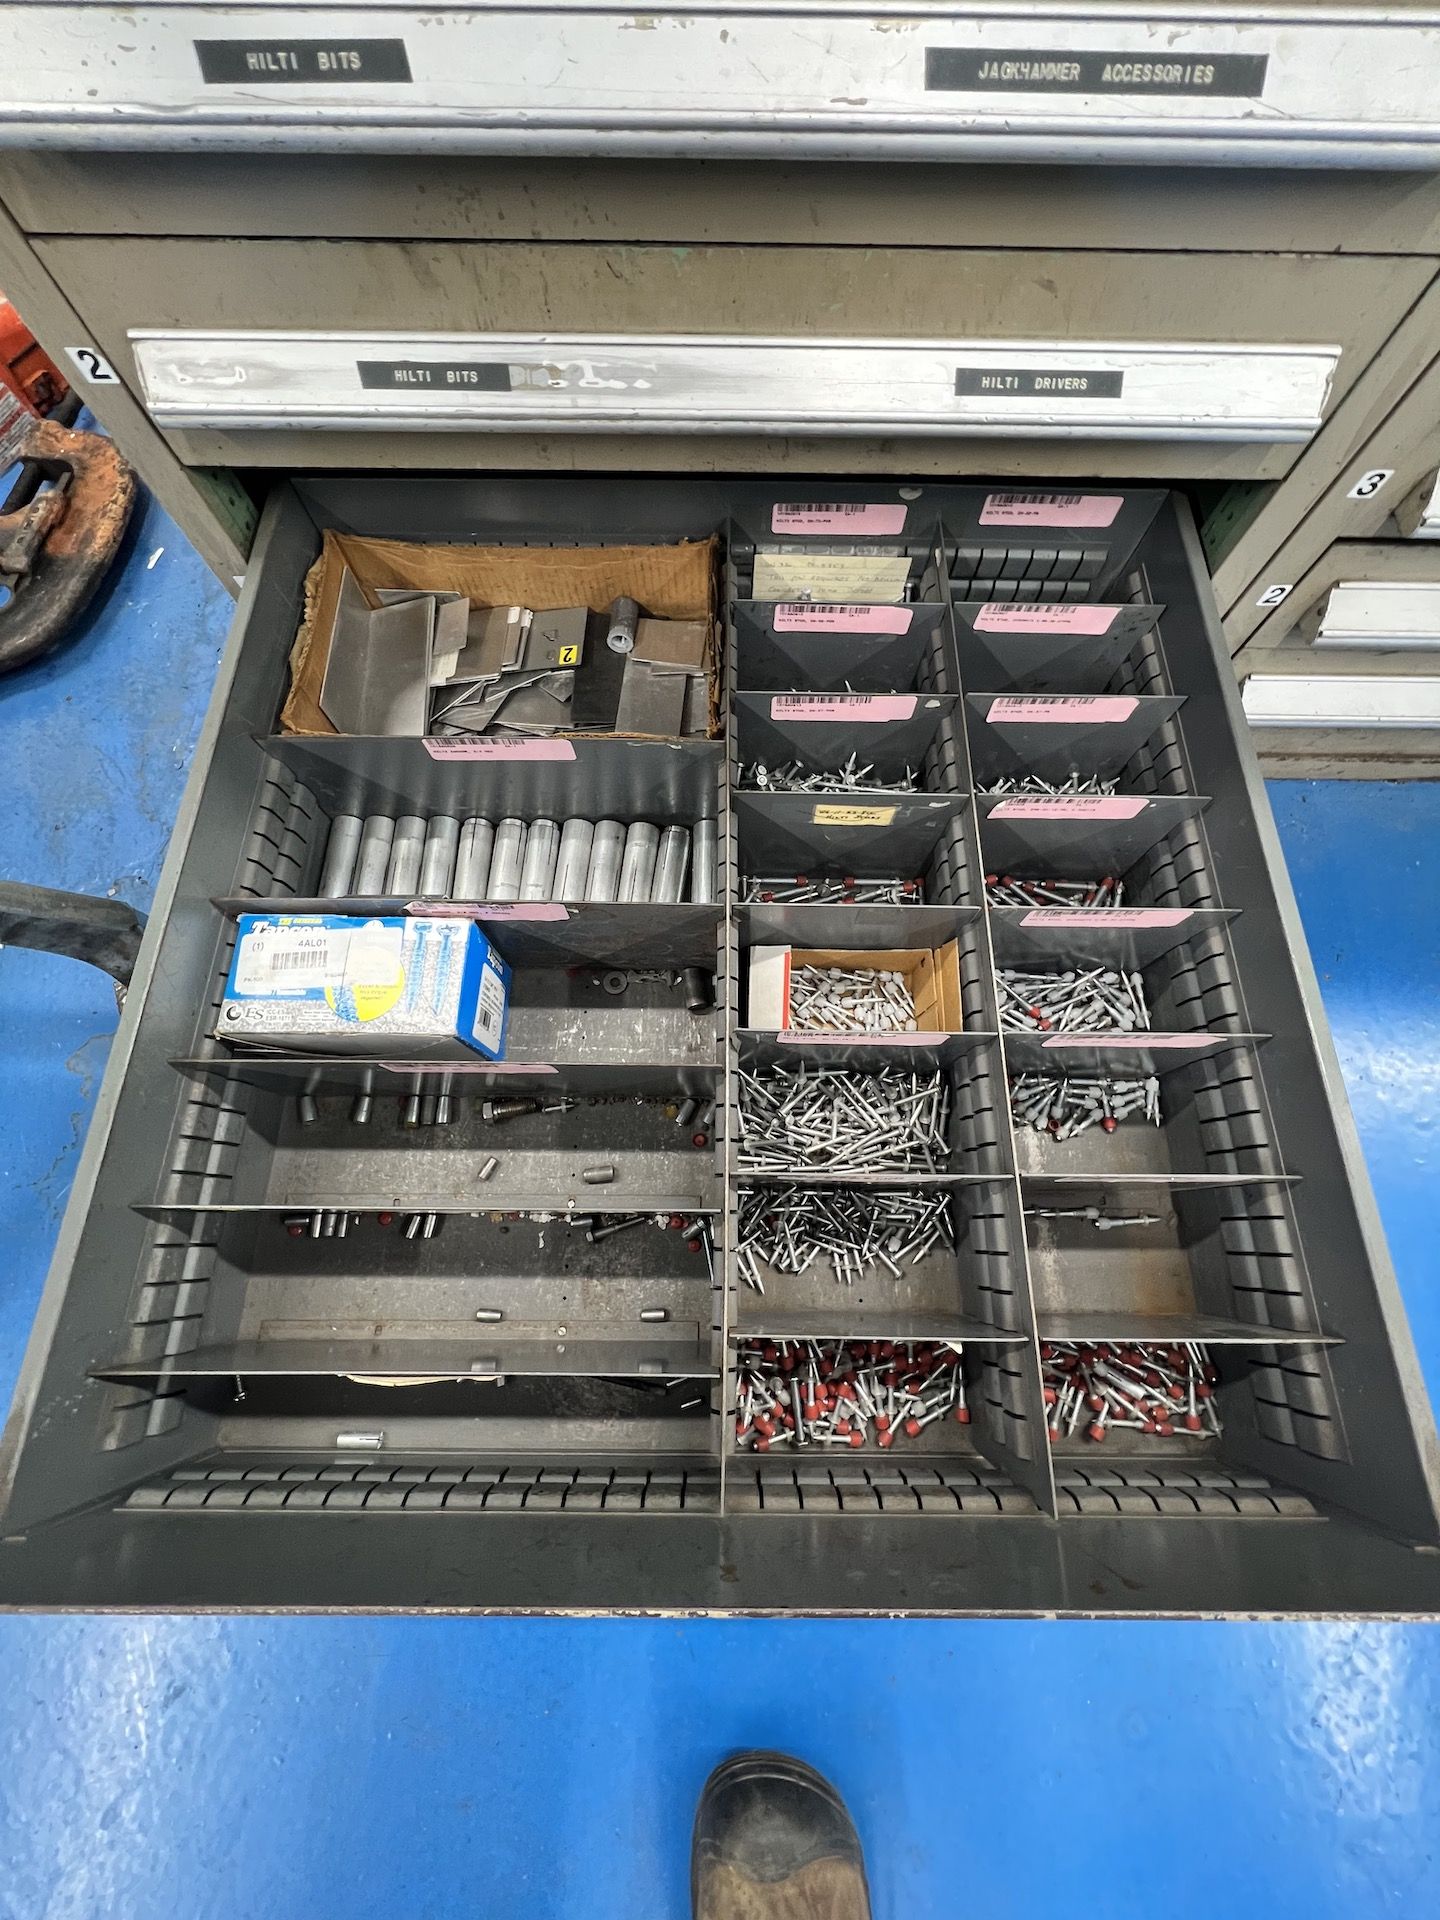 PARTS CABINET WTH CONTENTS, INCLUDES ASSORTED HARDWARE, SHEET METAL SCREWS, SEL-TAPPING SCREWS, - Image 13 of 13